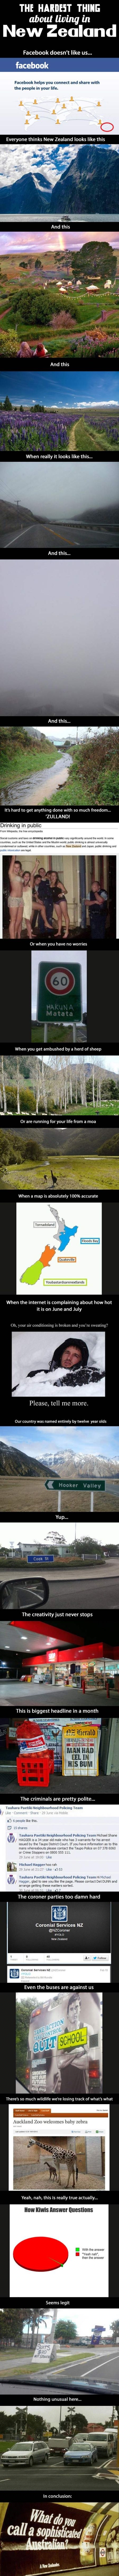 the hardest thing about living in New Zealand